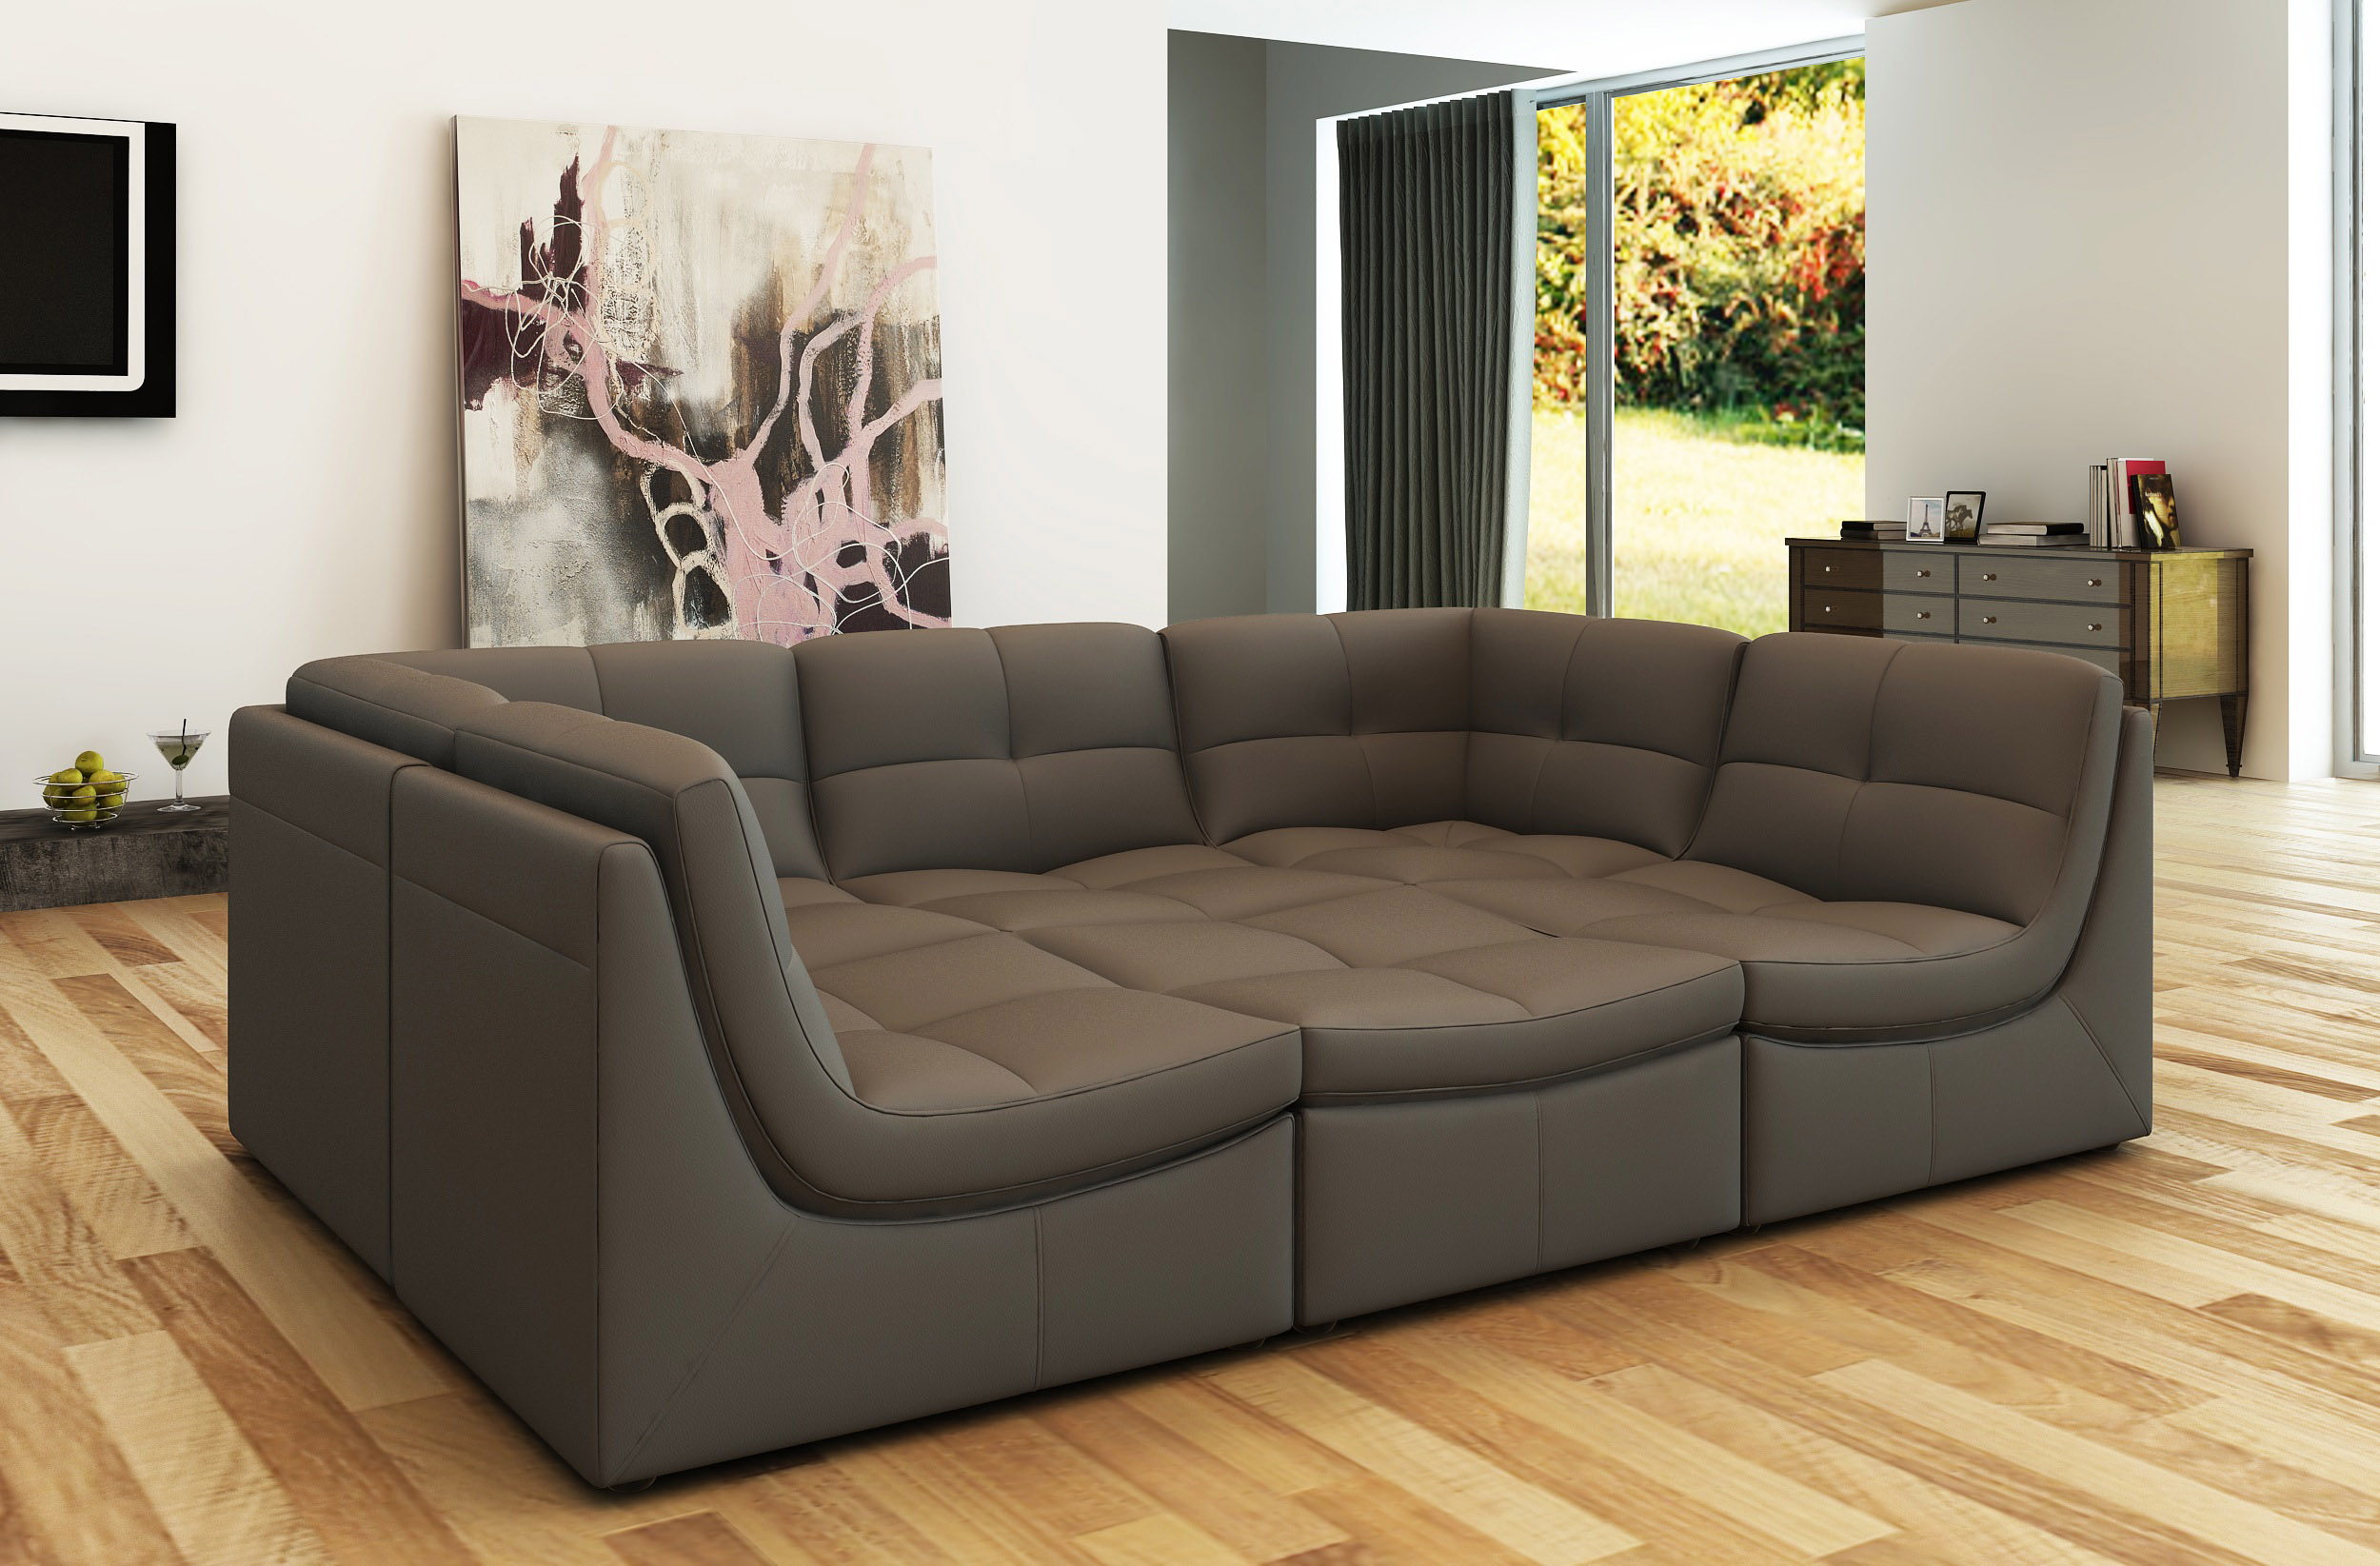 Advanced Adjustable Furniture Italian Leather Upholstery - Click Image to Close